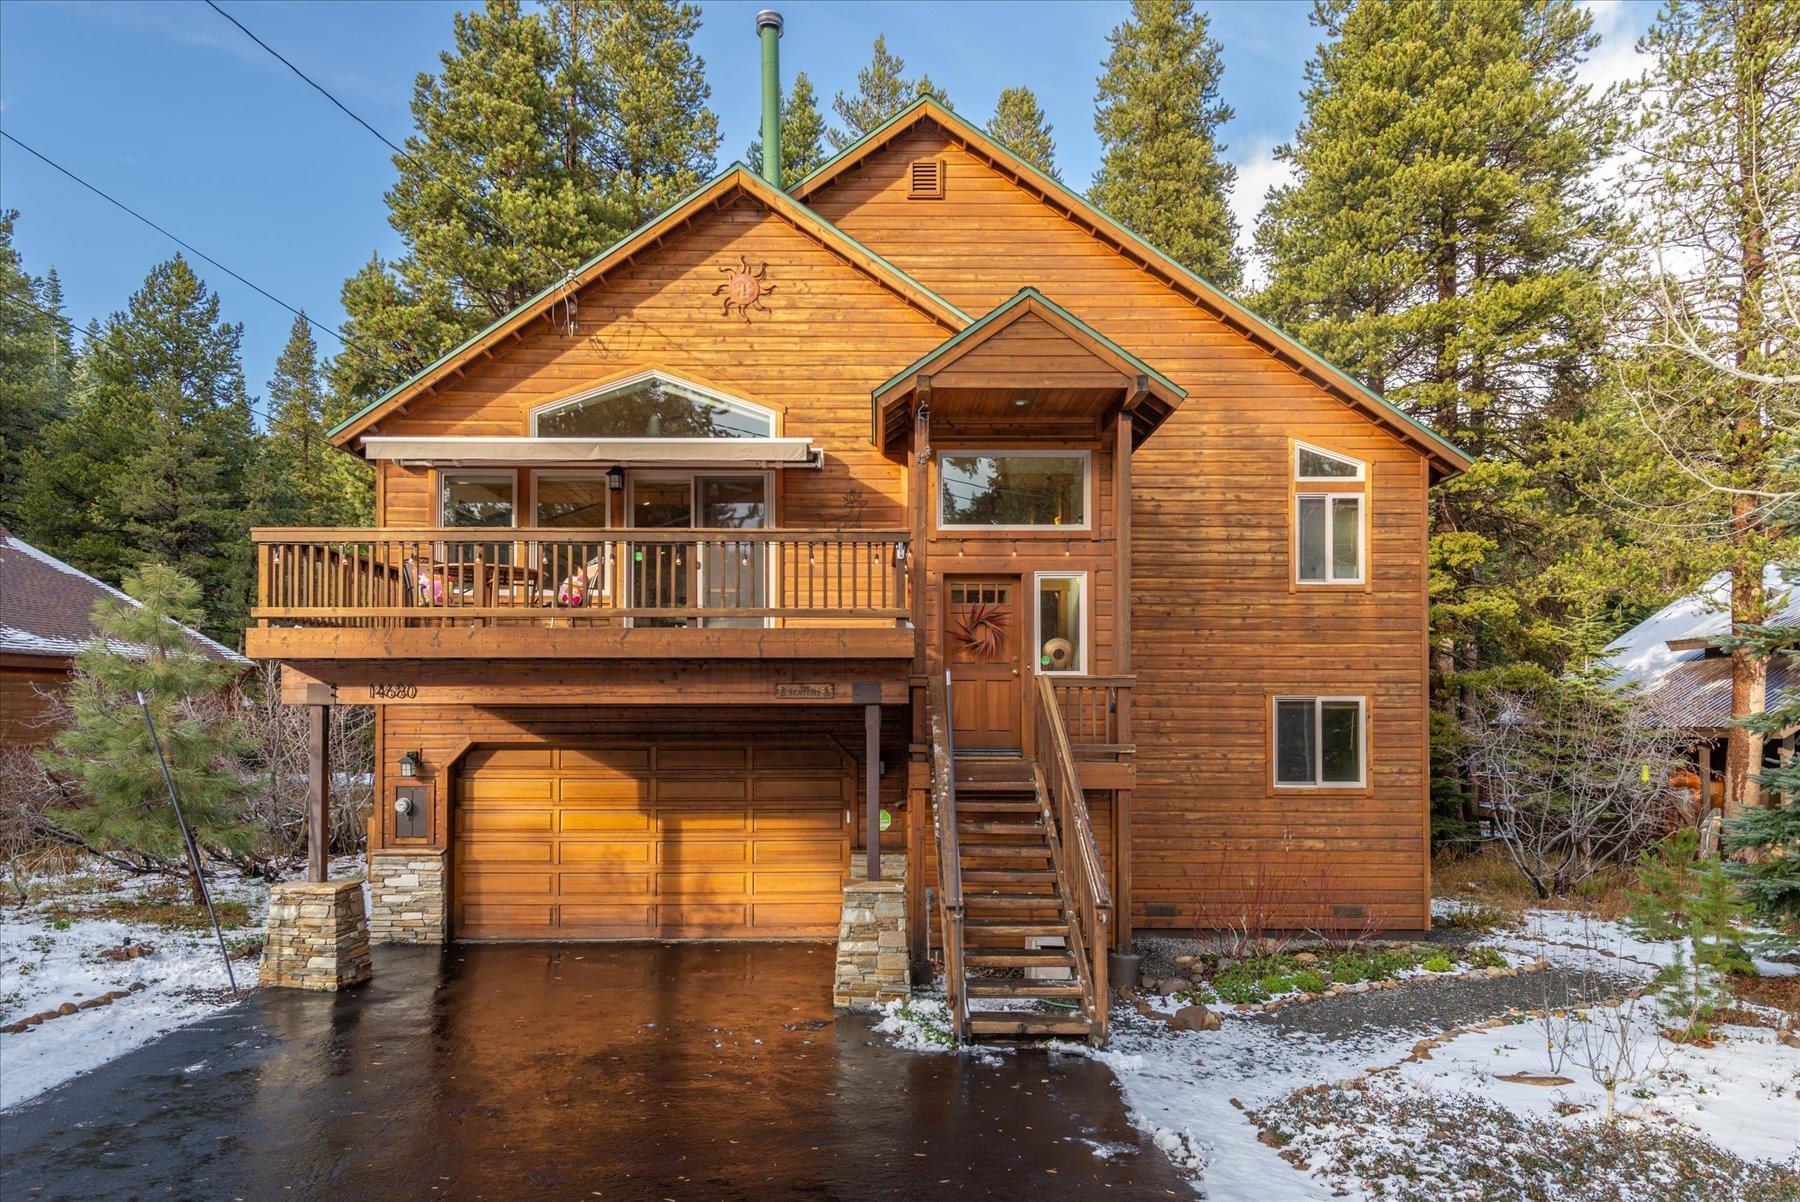 Image for 14680 Christie Lane, Truckee, CA 96161-9999